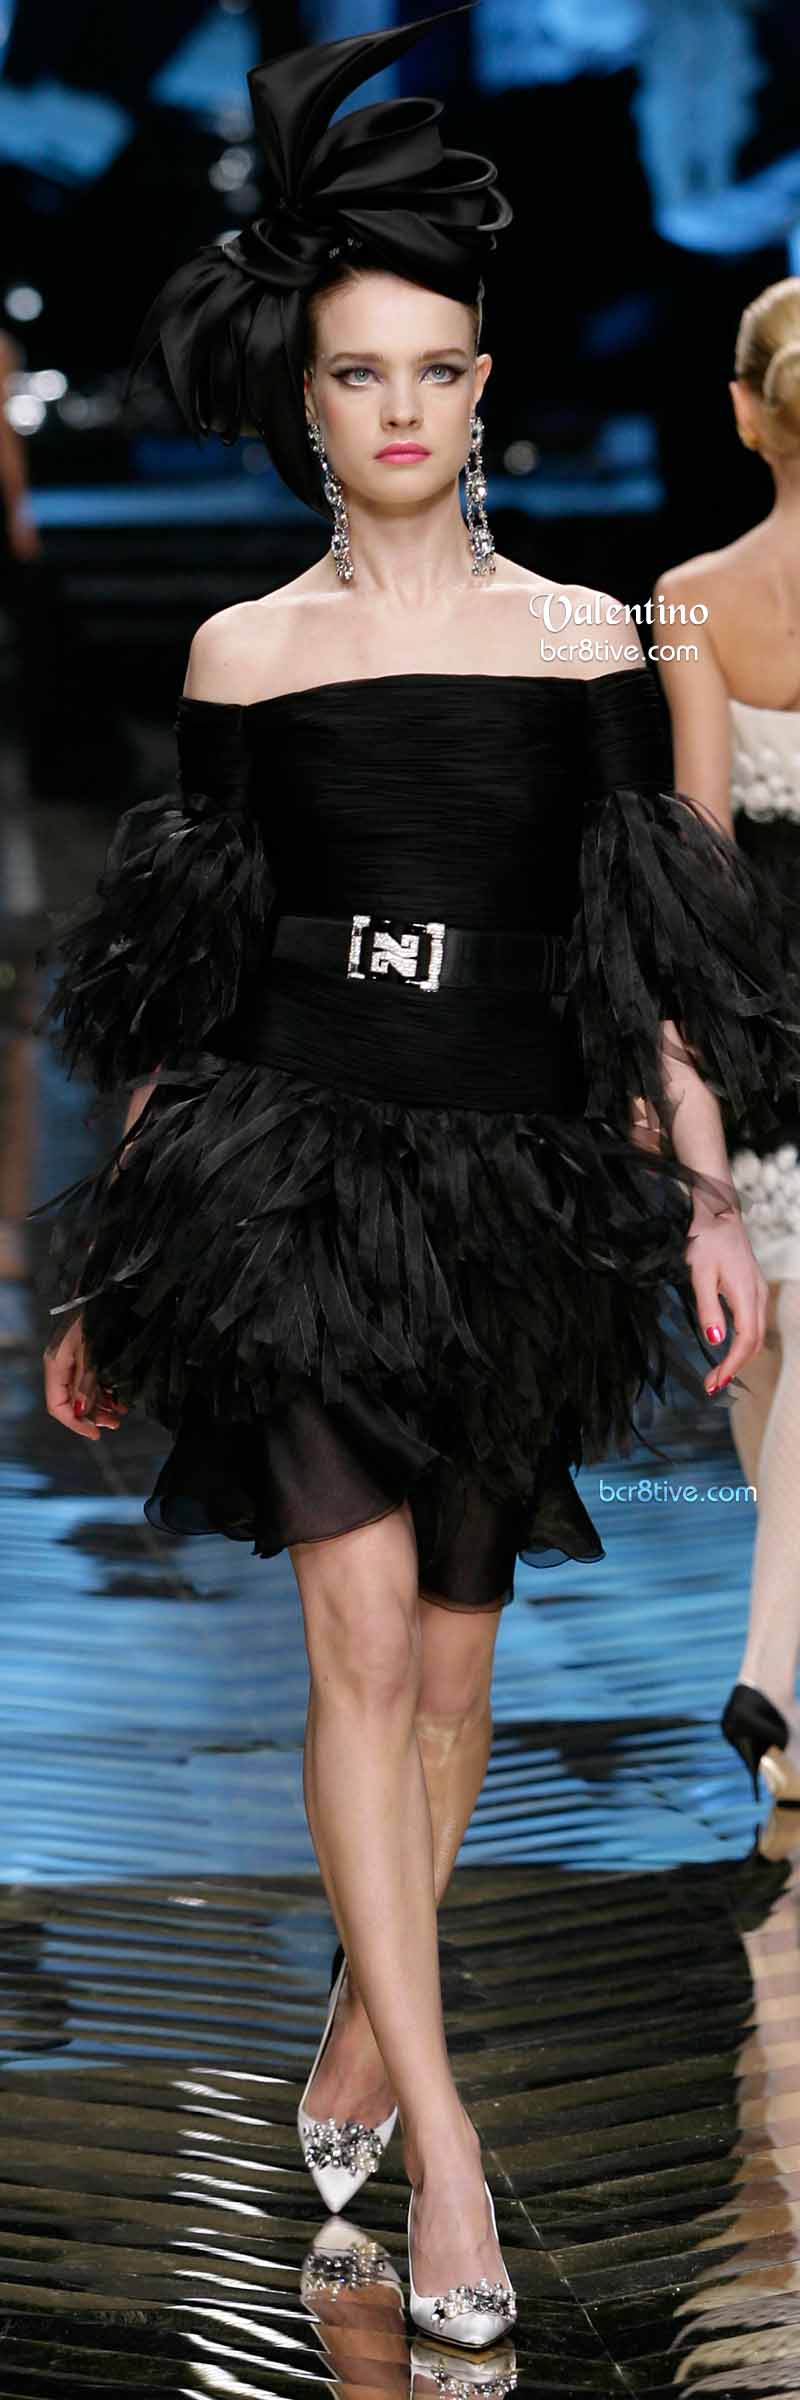 Valentino Black Ruffled Cocktail Dress and Hat